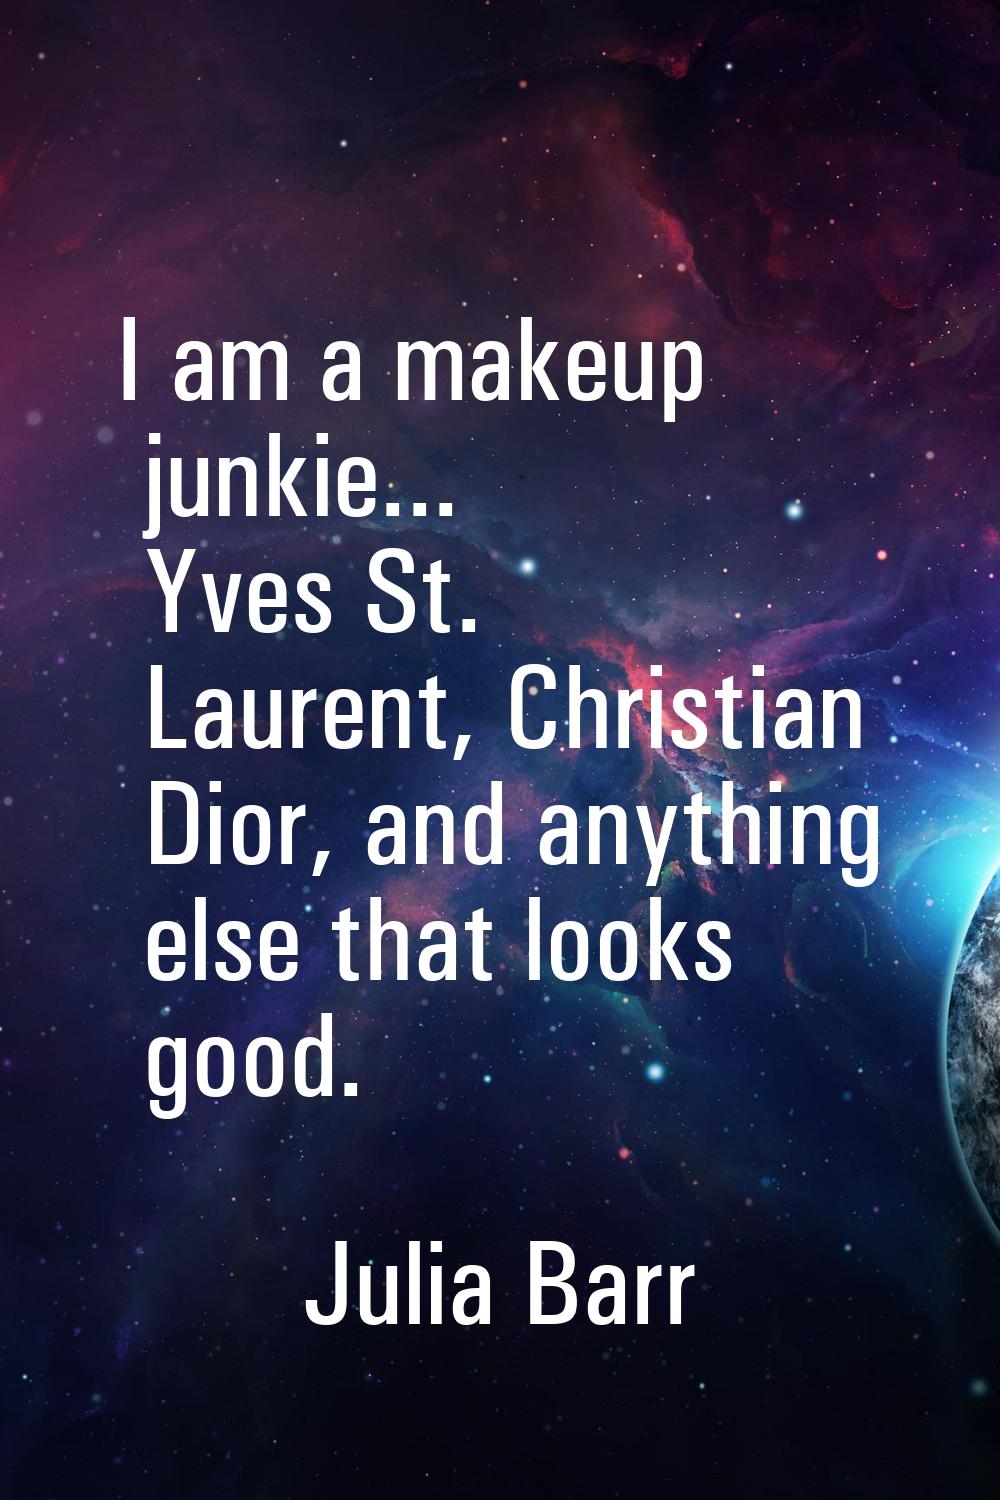 I am a makeup junkie... Yves St. Laurent, Christian Dior, and anything else that looks good.